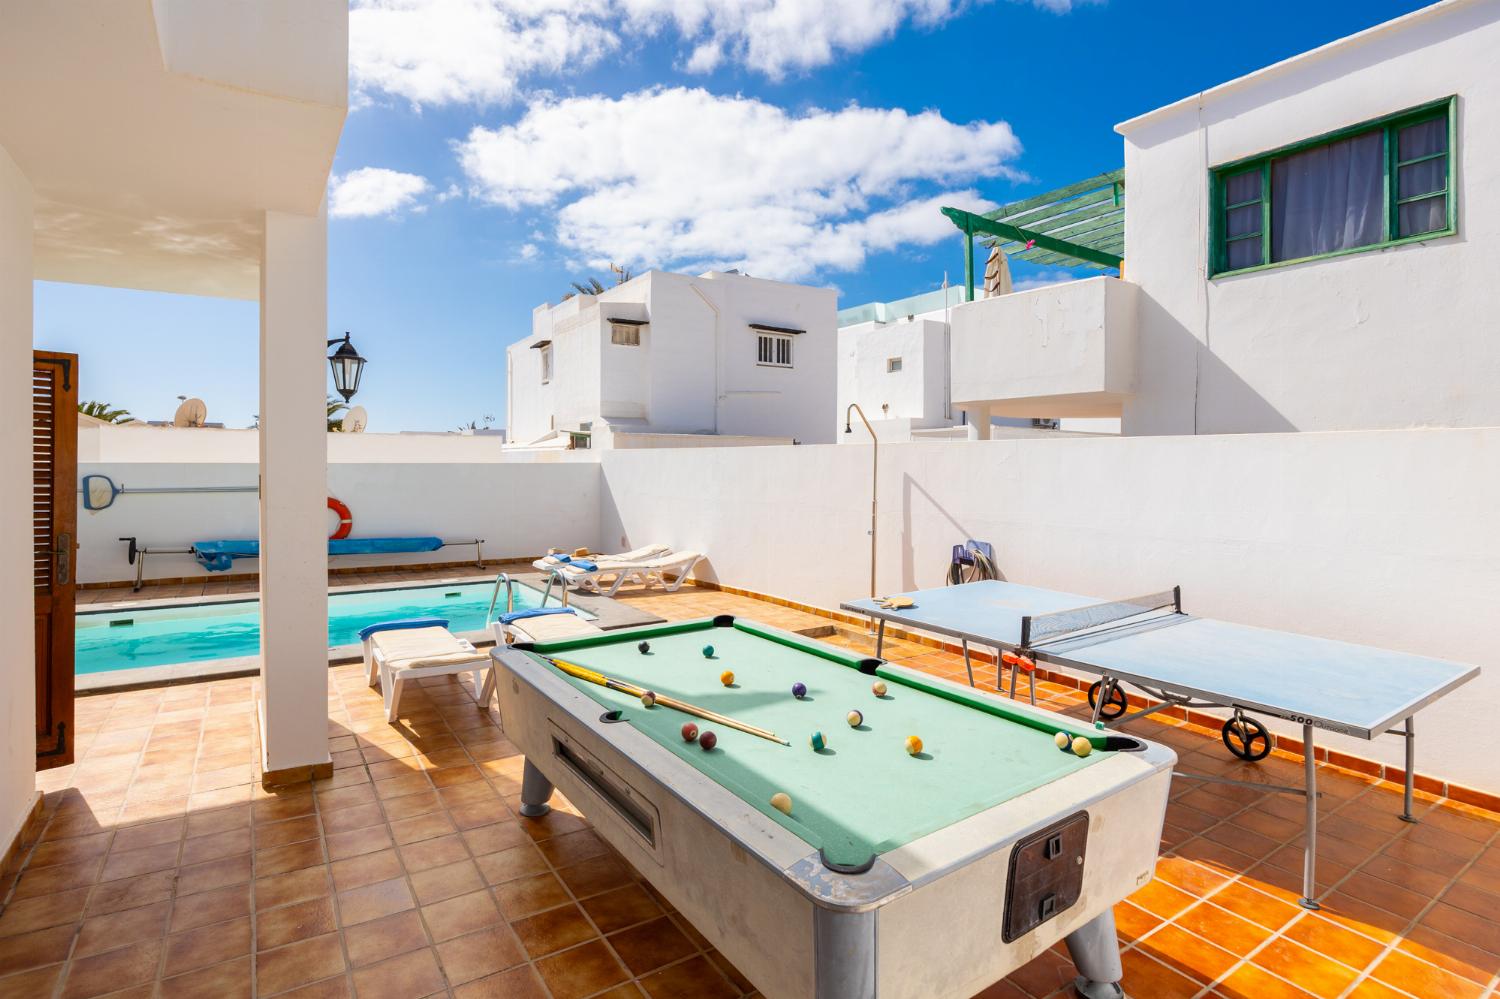 Terrace area with pool table and table tennis